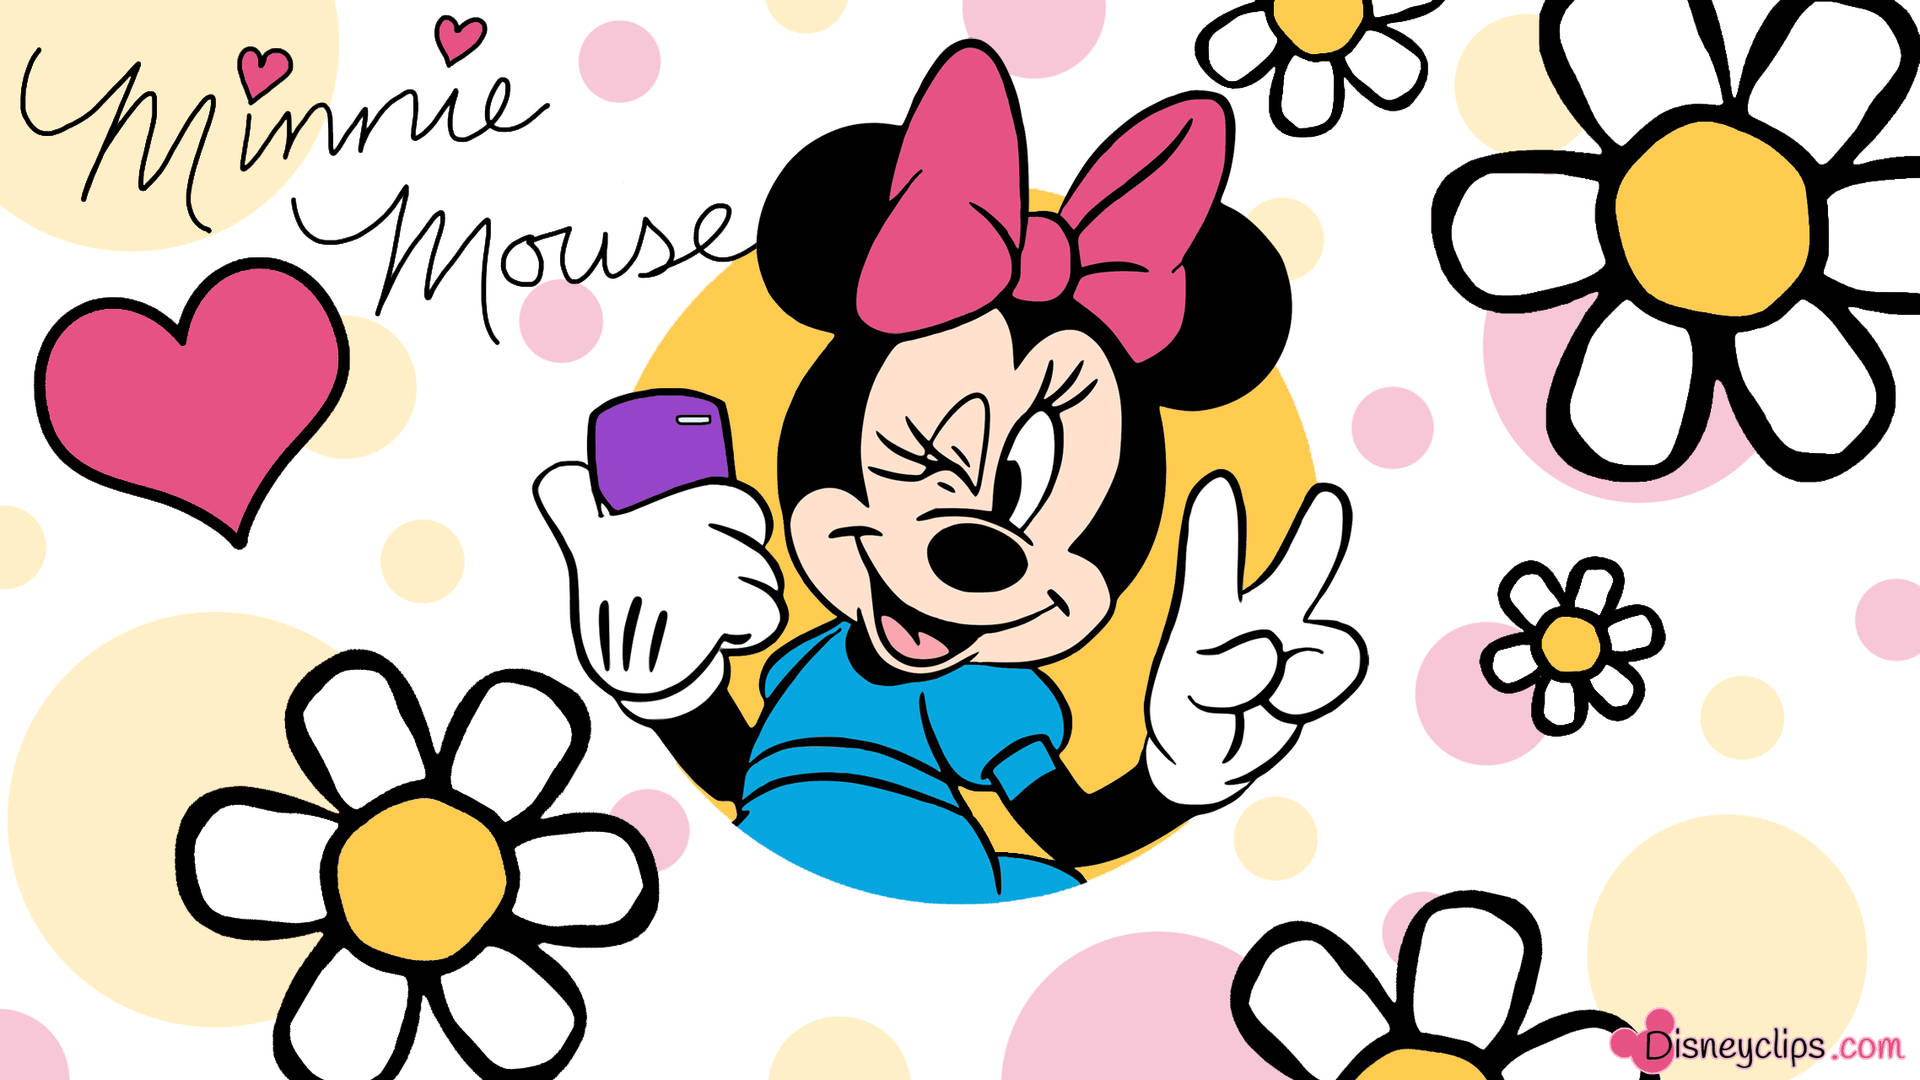 Minnie Mouse Posing For Selfie Wallpaper